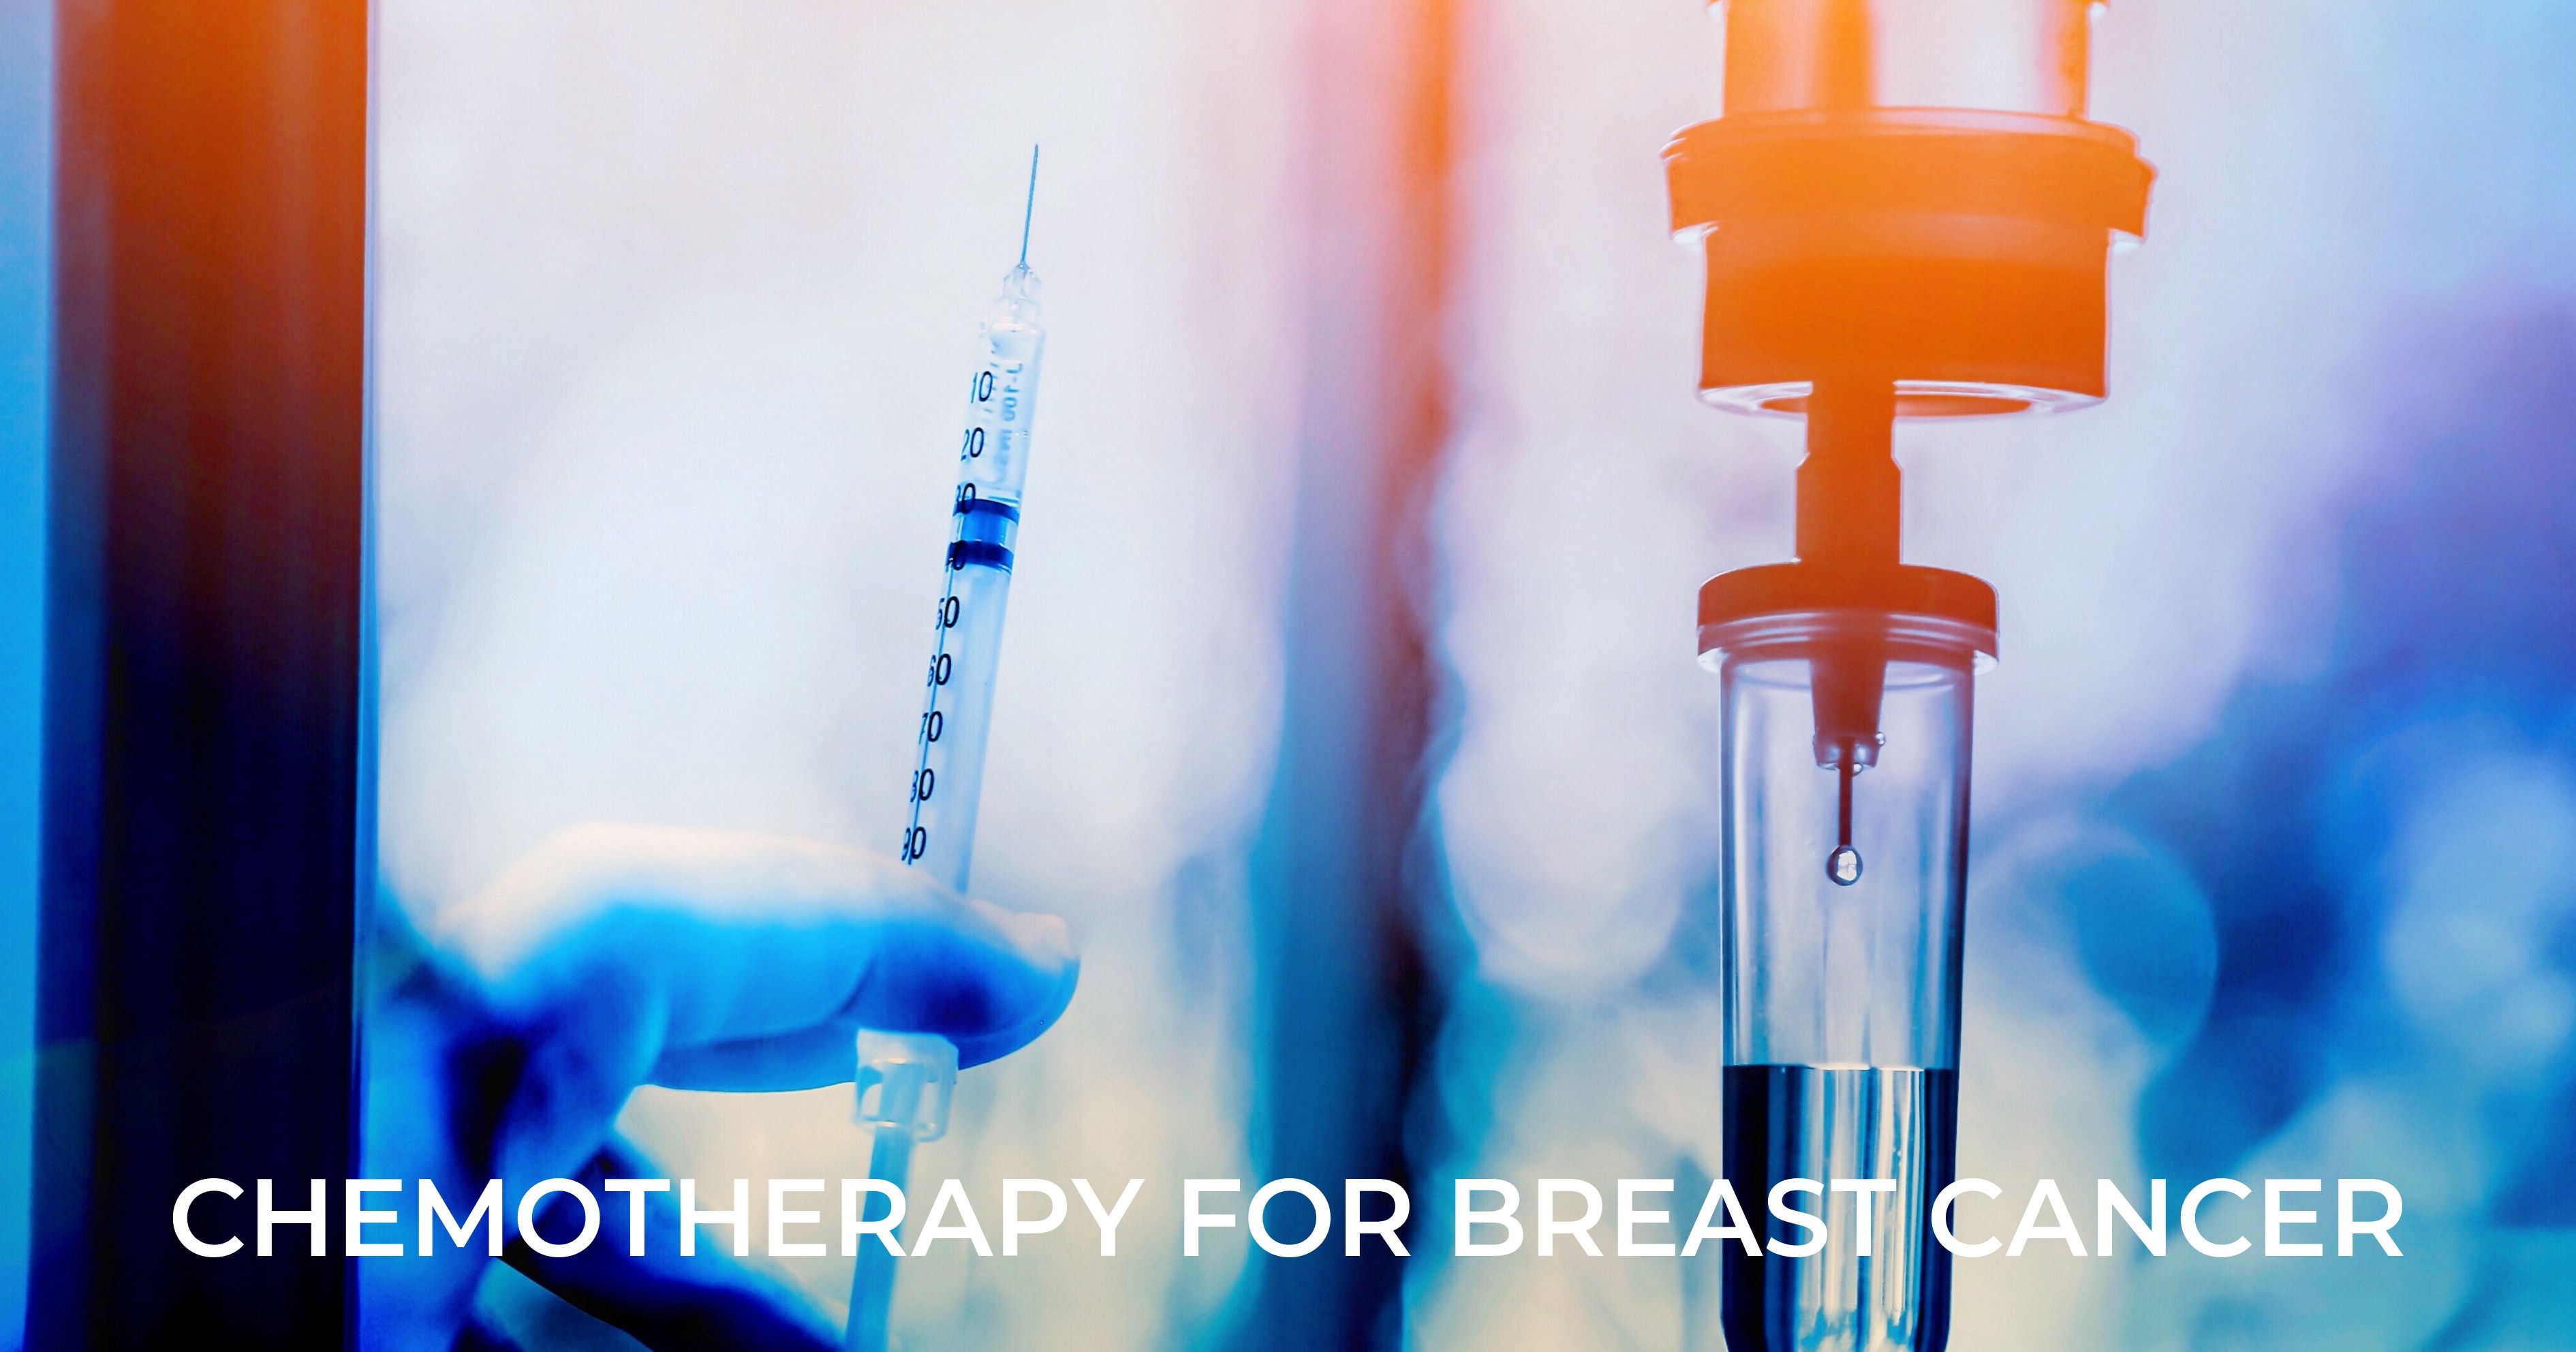 Chemotherapy for breast cancer